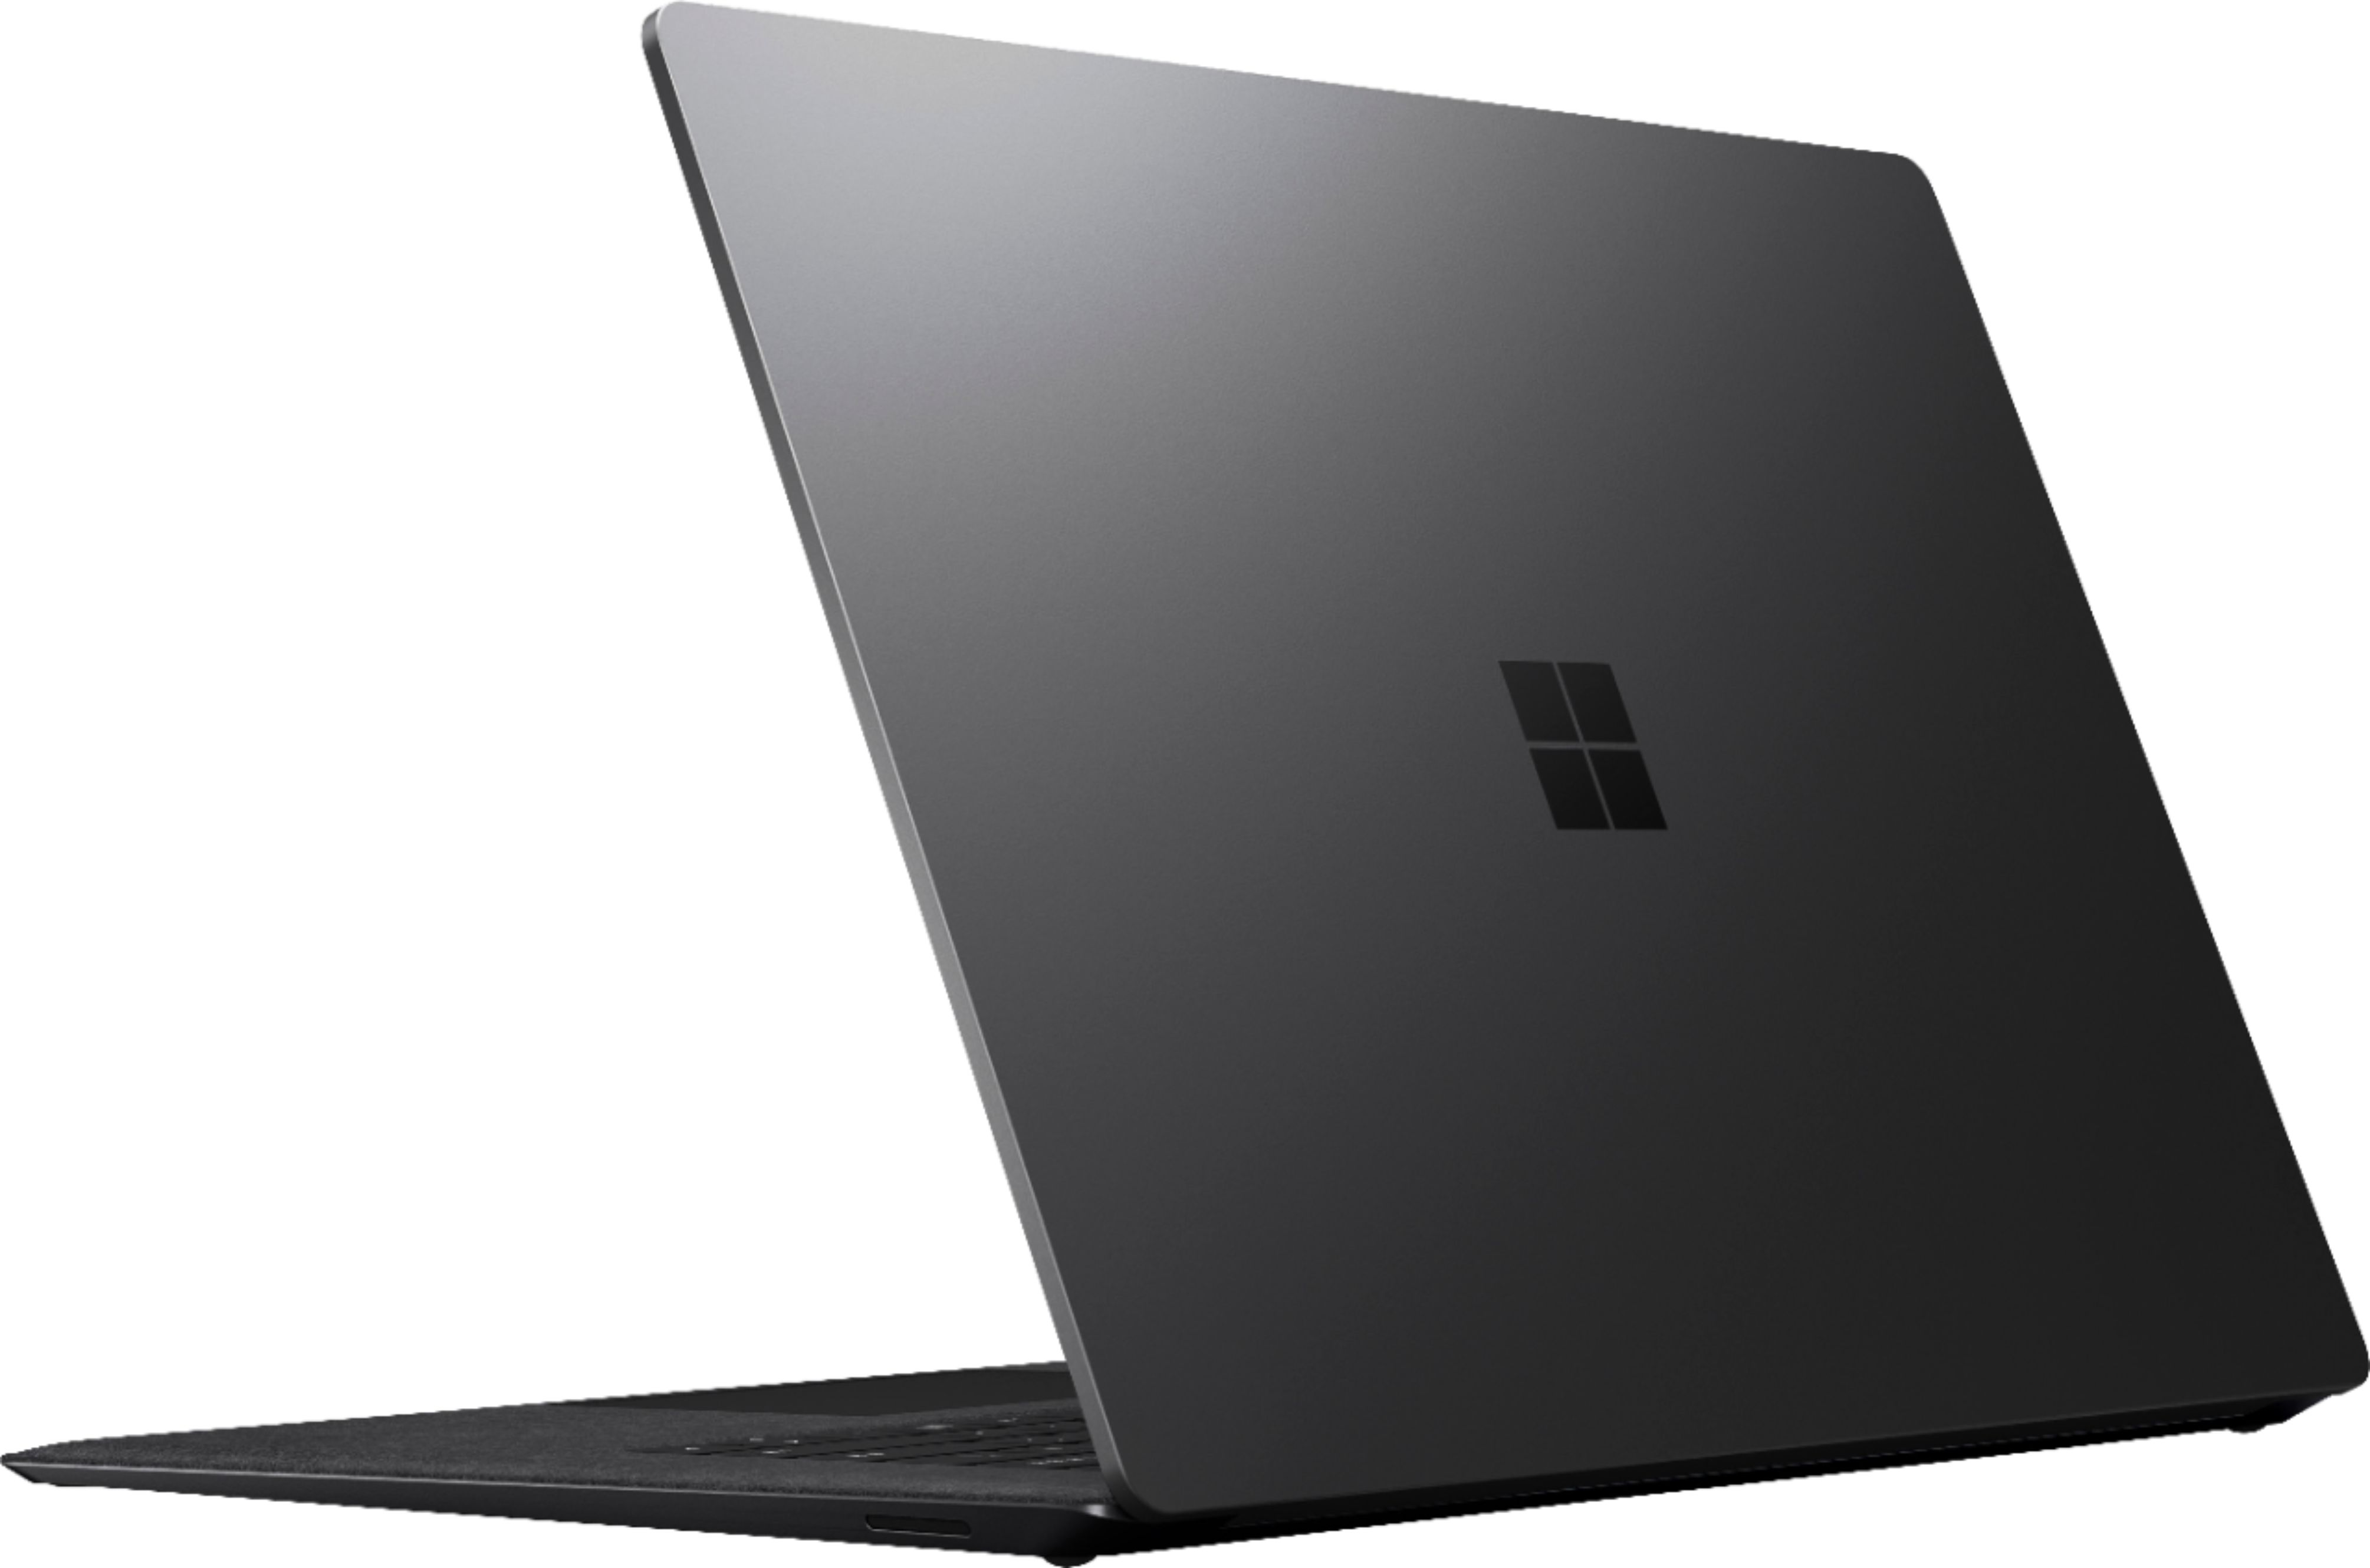 PC/タブレット タブレット Best Buy: Microsoft Geek Squad Certified Refurbished Surface 